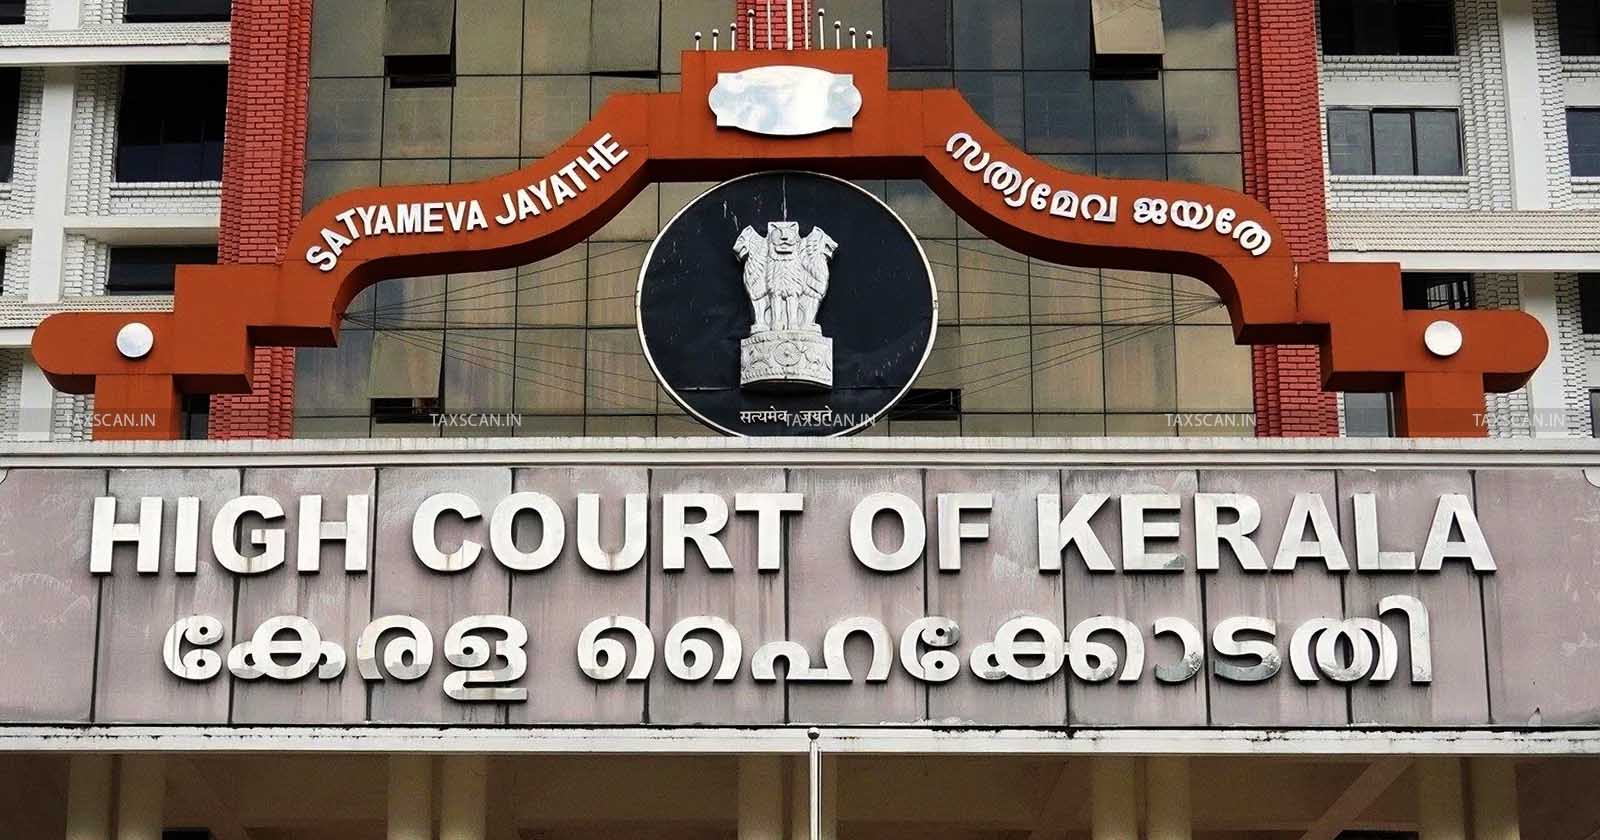 Acceptance to Approach Authority - GST Amnesty Scheme - GST - Amnesty Scheme - Goods And Service Tax - Service Tax - Kerala High Court - dismisses Writ Petition - Writ Petitions - Tax News - TAXSCAN